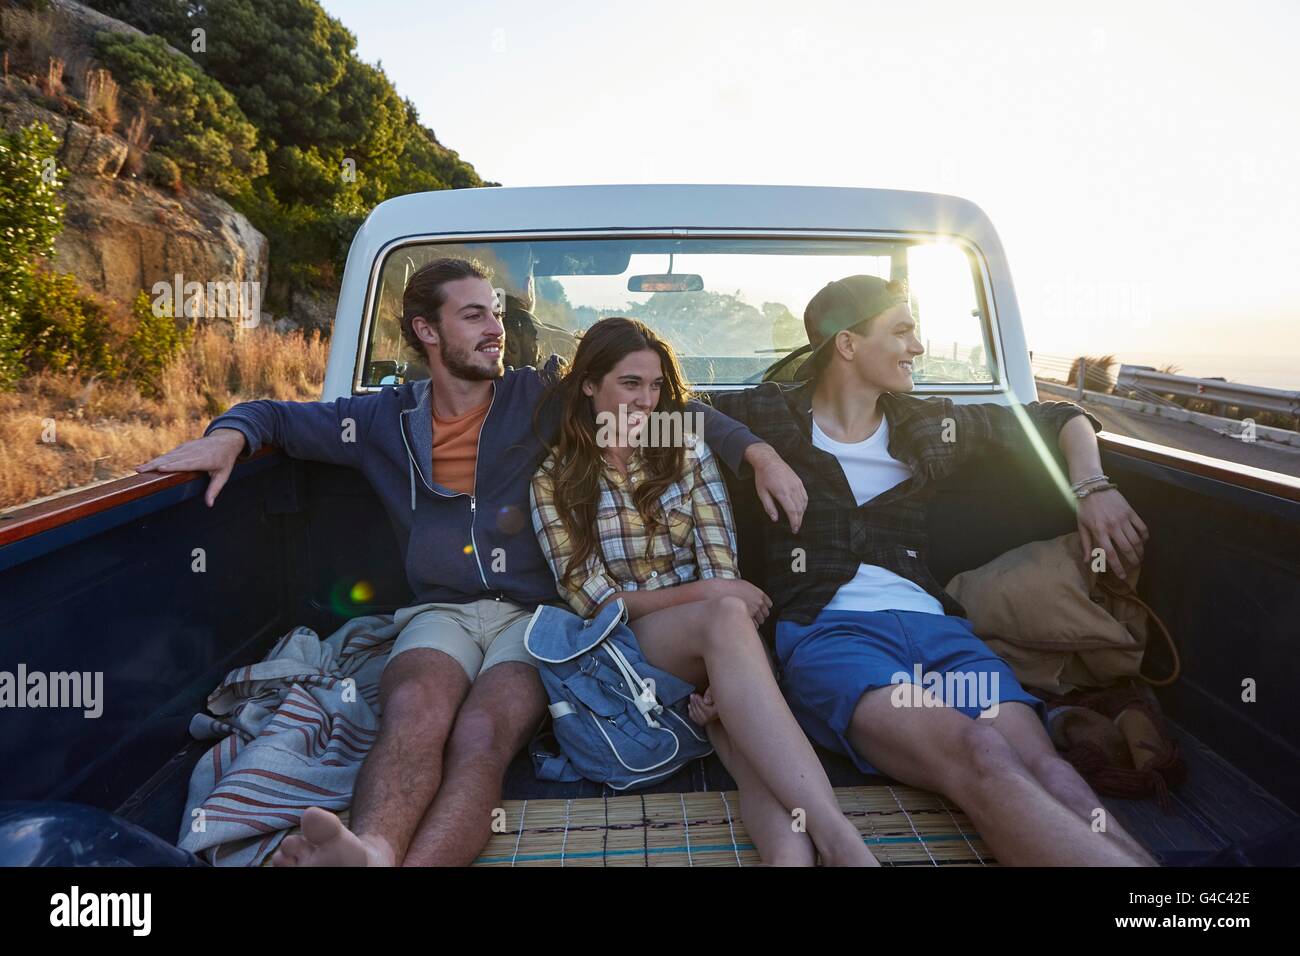 MODEL RELEASED. Young friends in pick up truck. Stock Photo